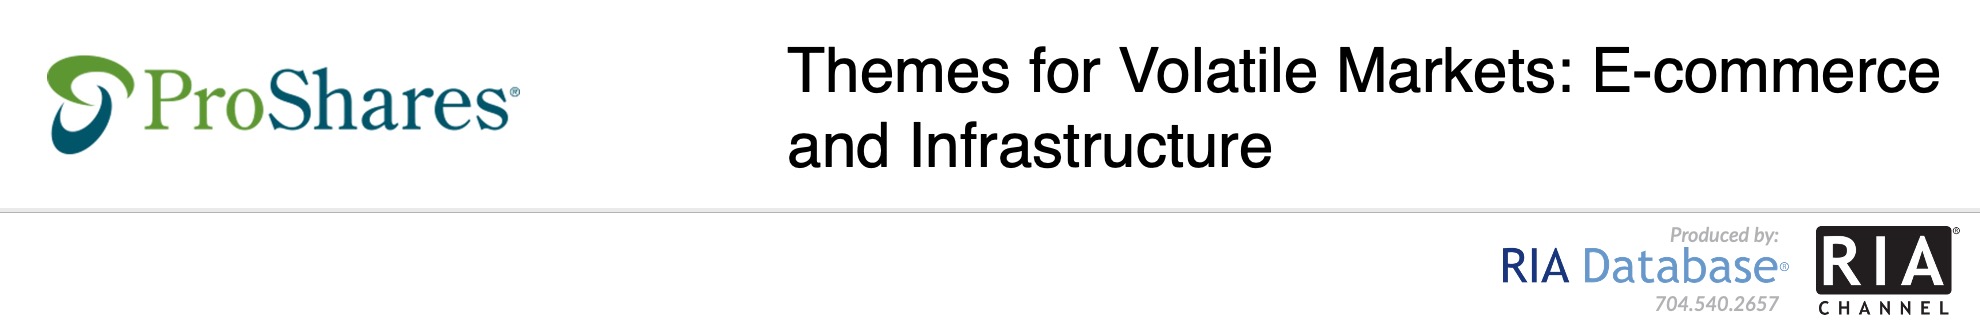 Themes for Volatile Markets: E-commerce and Infrastructure